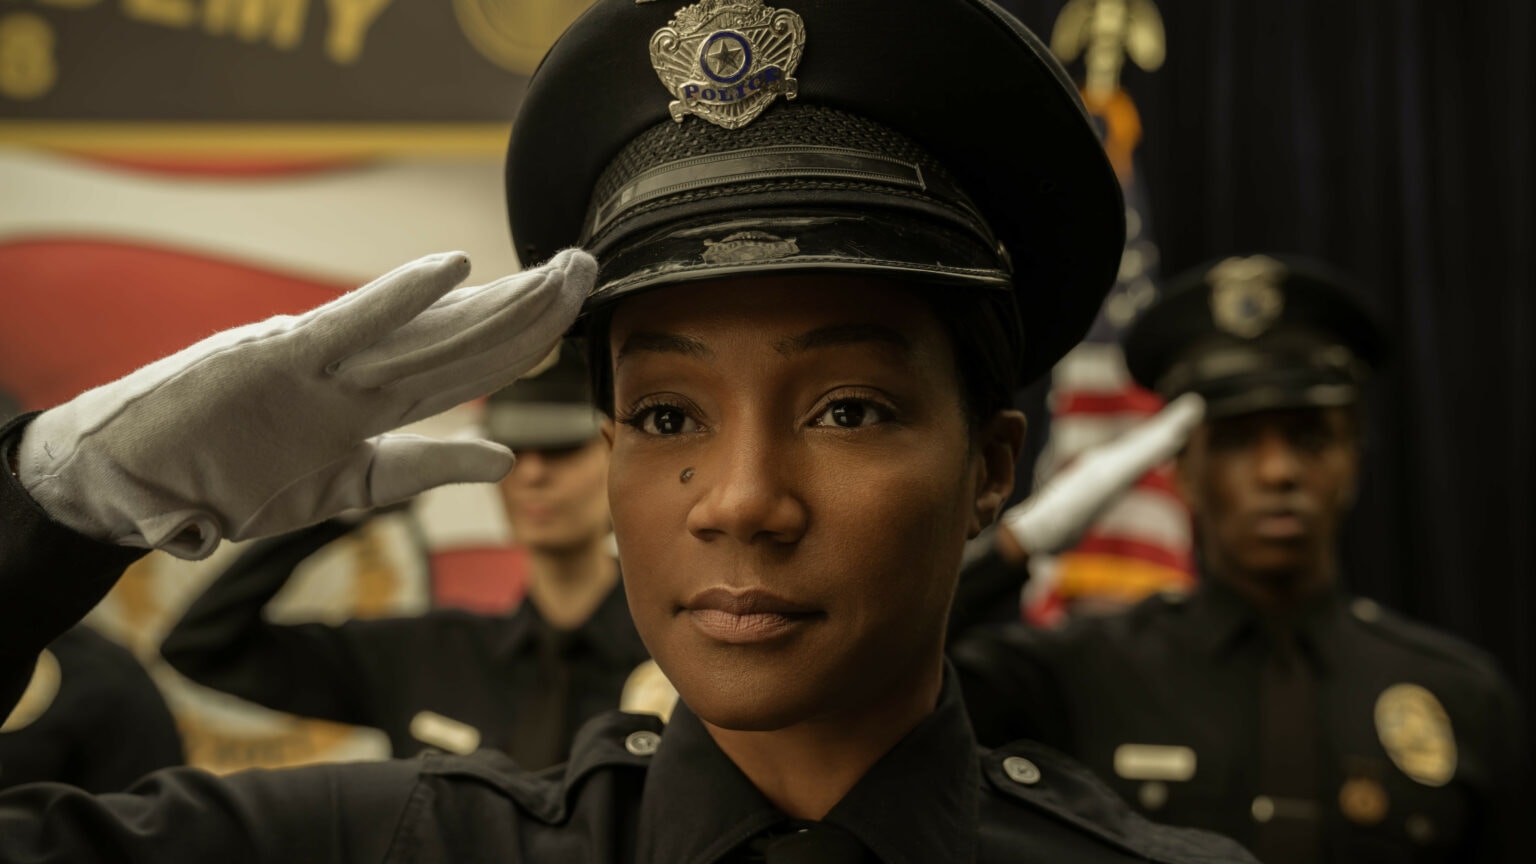 The Afterparty recap: Detective Danner (played by Tiffany Haddish) reports for duty in a dreadful flashback episode.